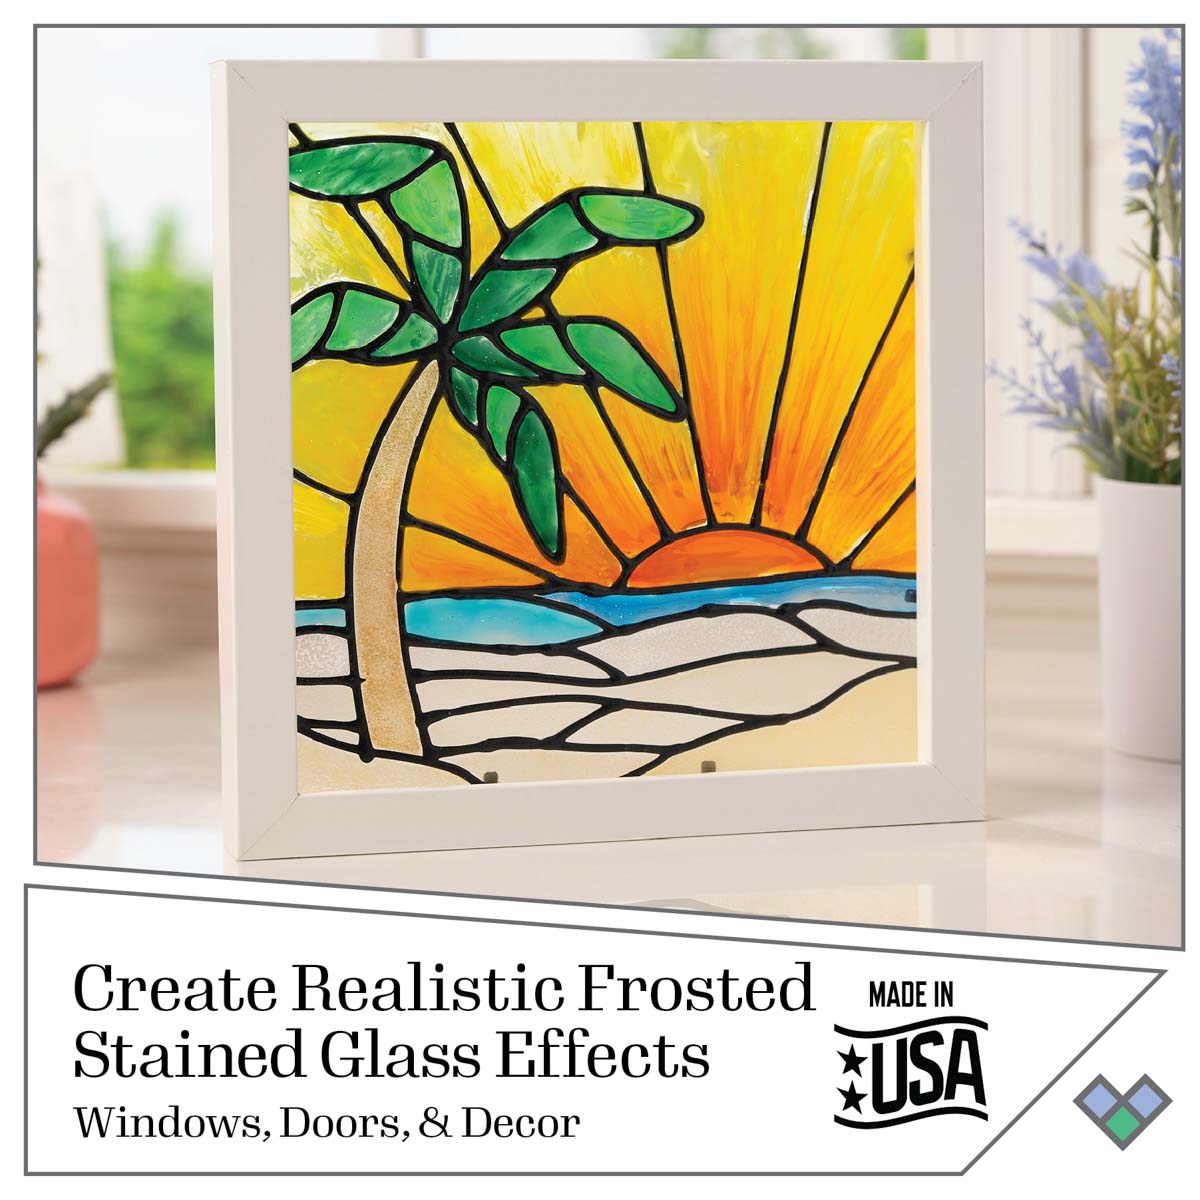 Glass Stain - A solvent-based glass paint - Dala